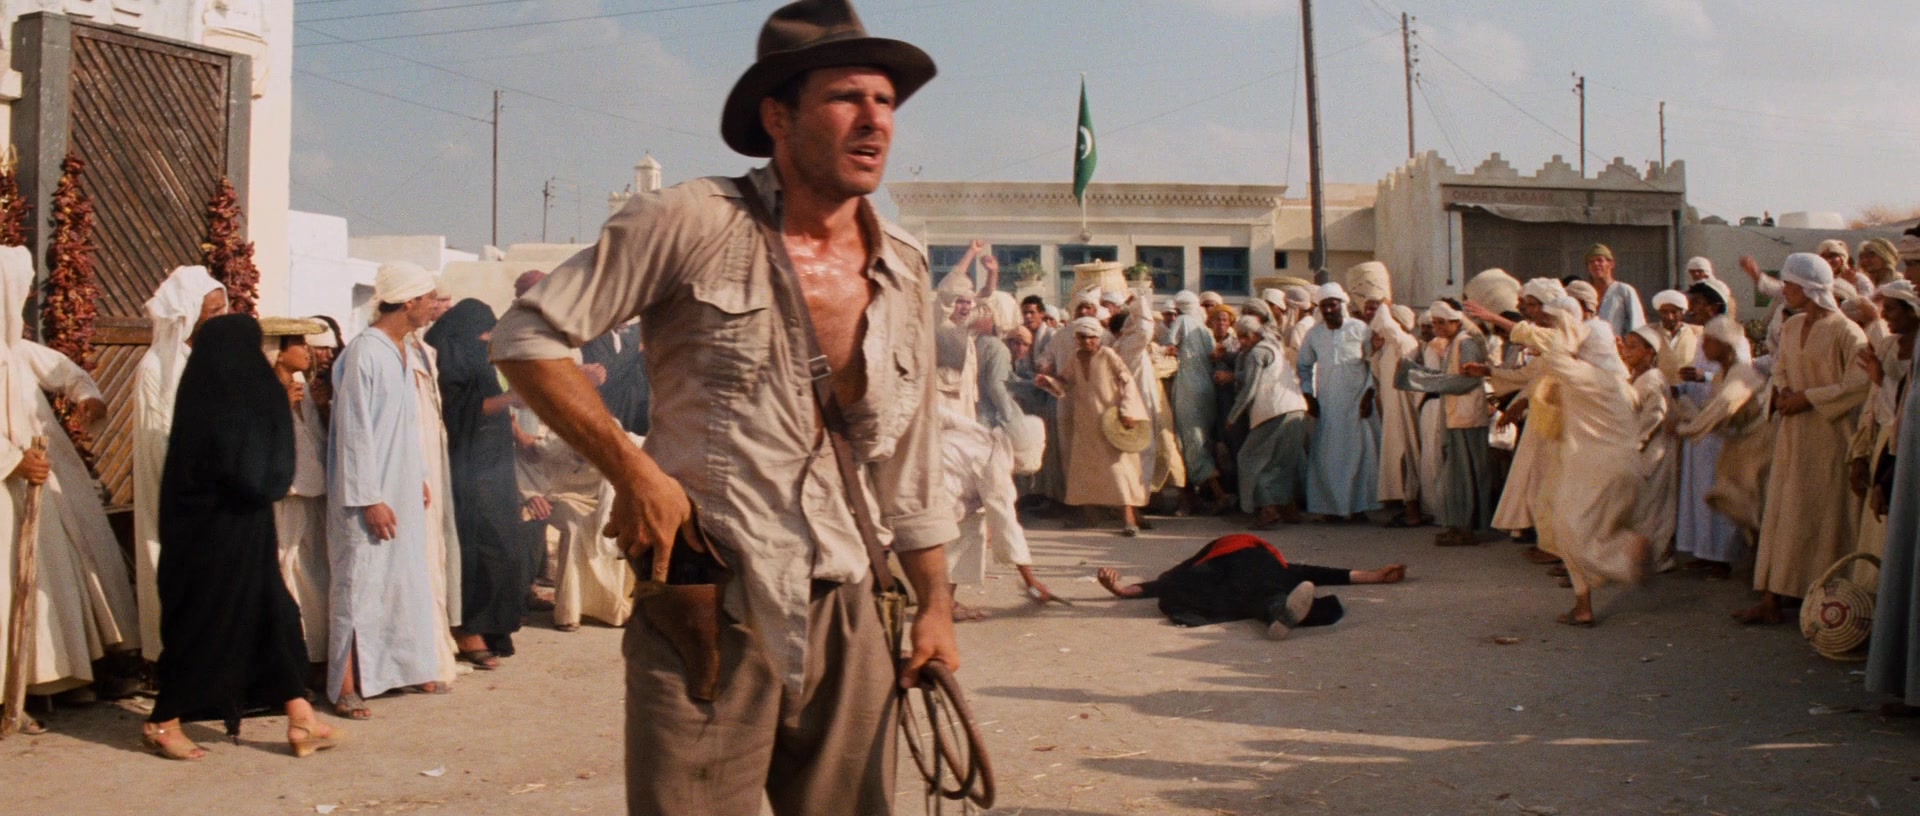 Indiana Jones (Harrison Ford) has no time for fancy sword play in 'Raiders of the Lost Ark' (1981), Paramount Pictures via Blu-ray